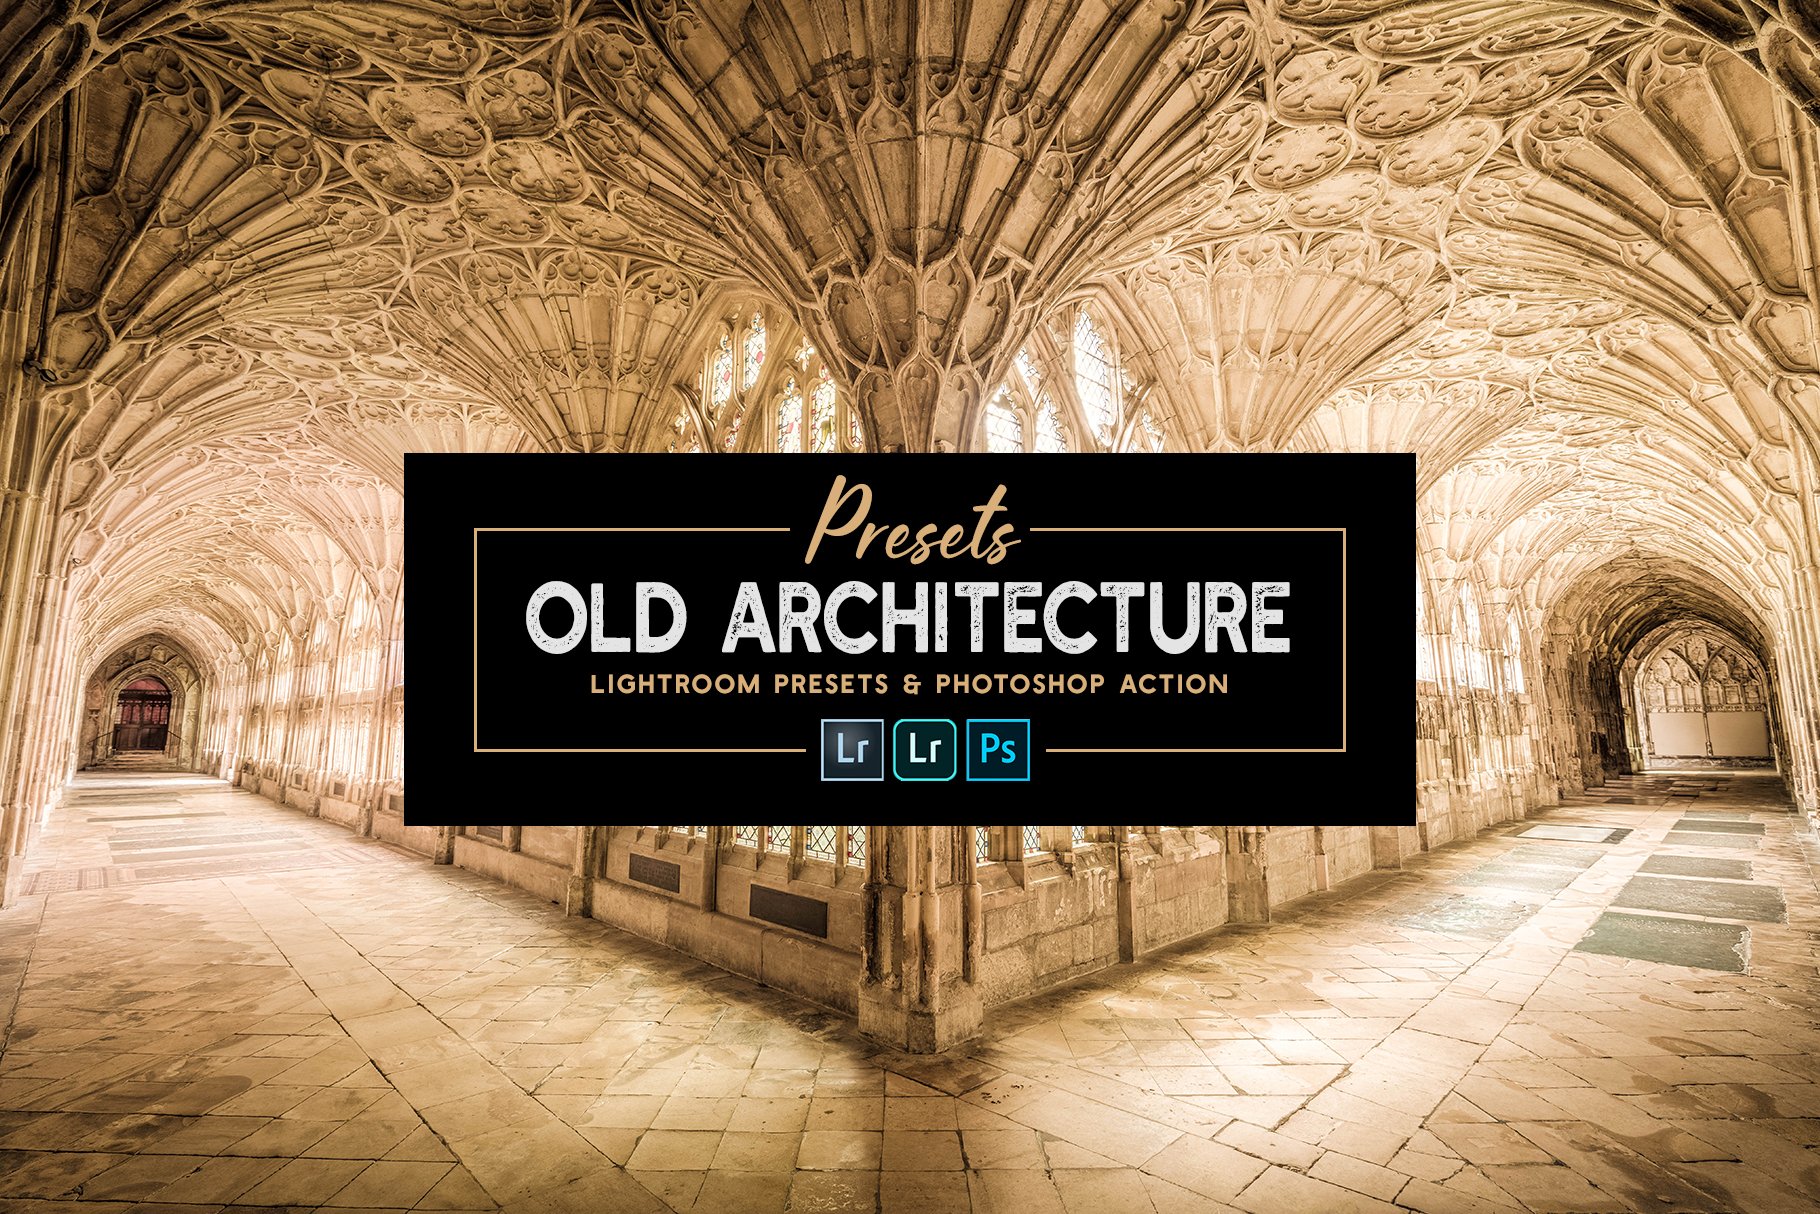 Old Architecture Presets & Actionscover image.